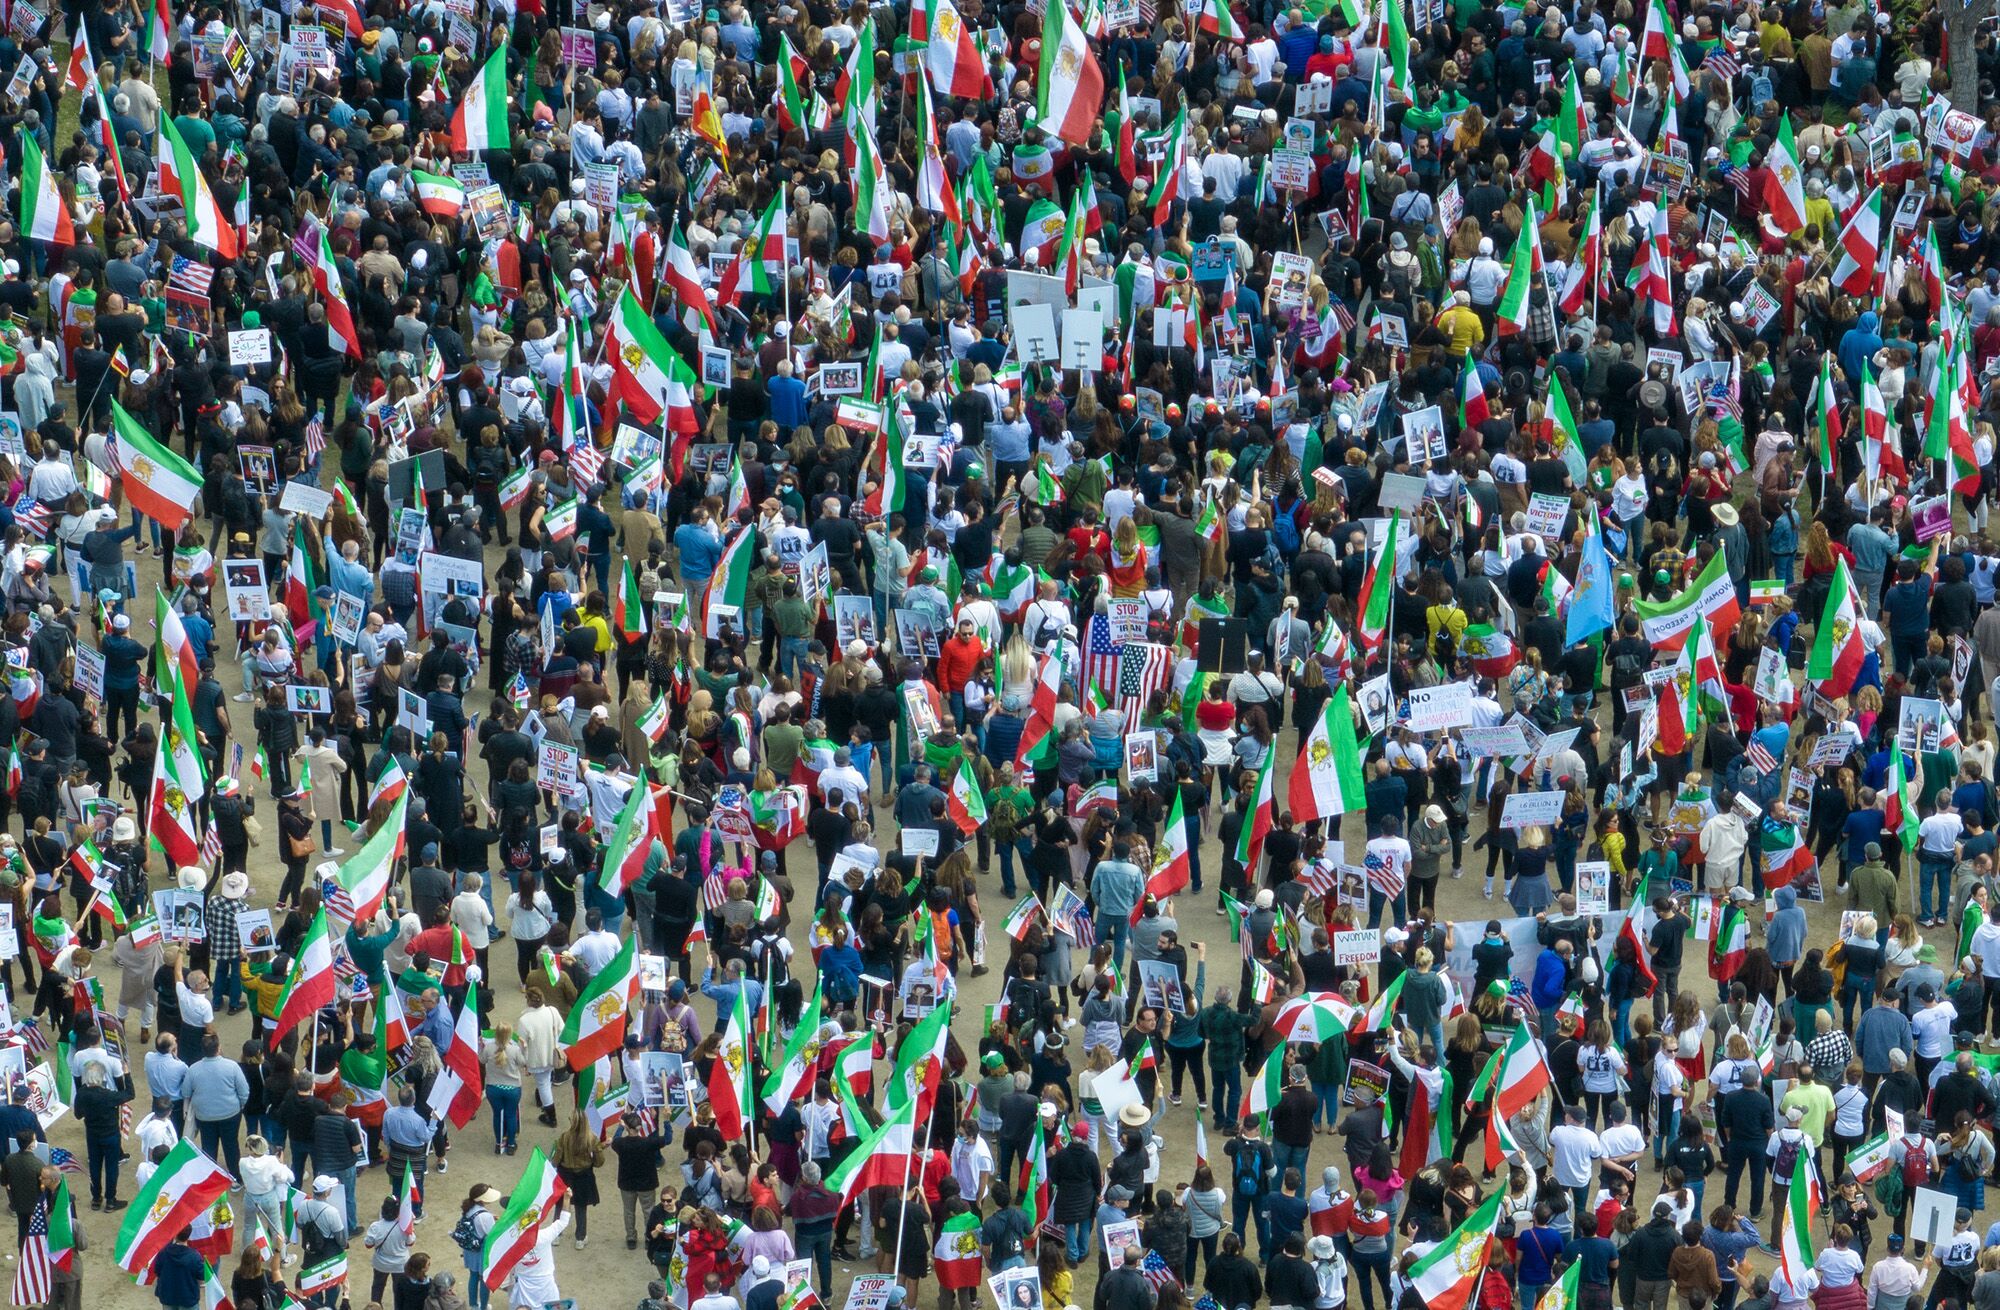 A large crowd of people, many holding flags or signs